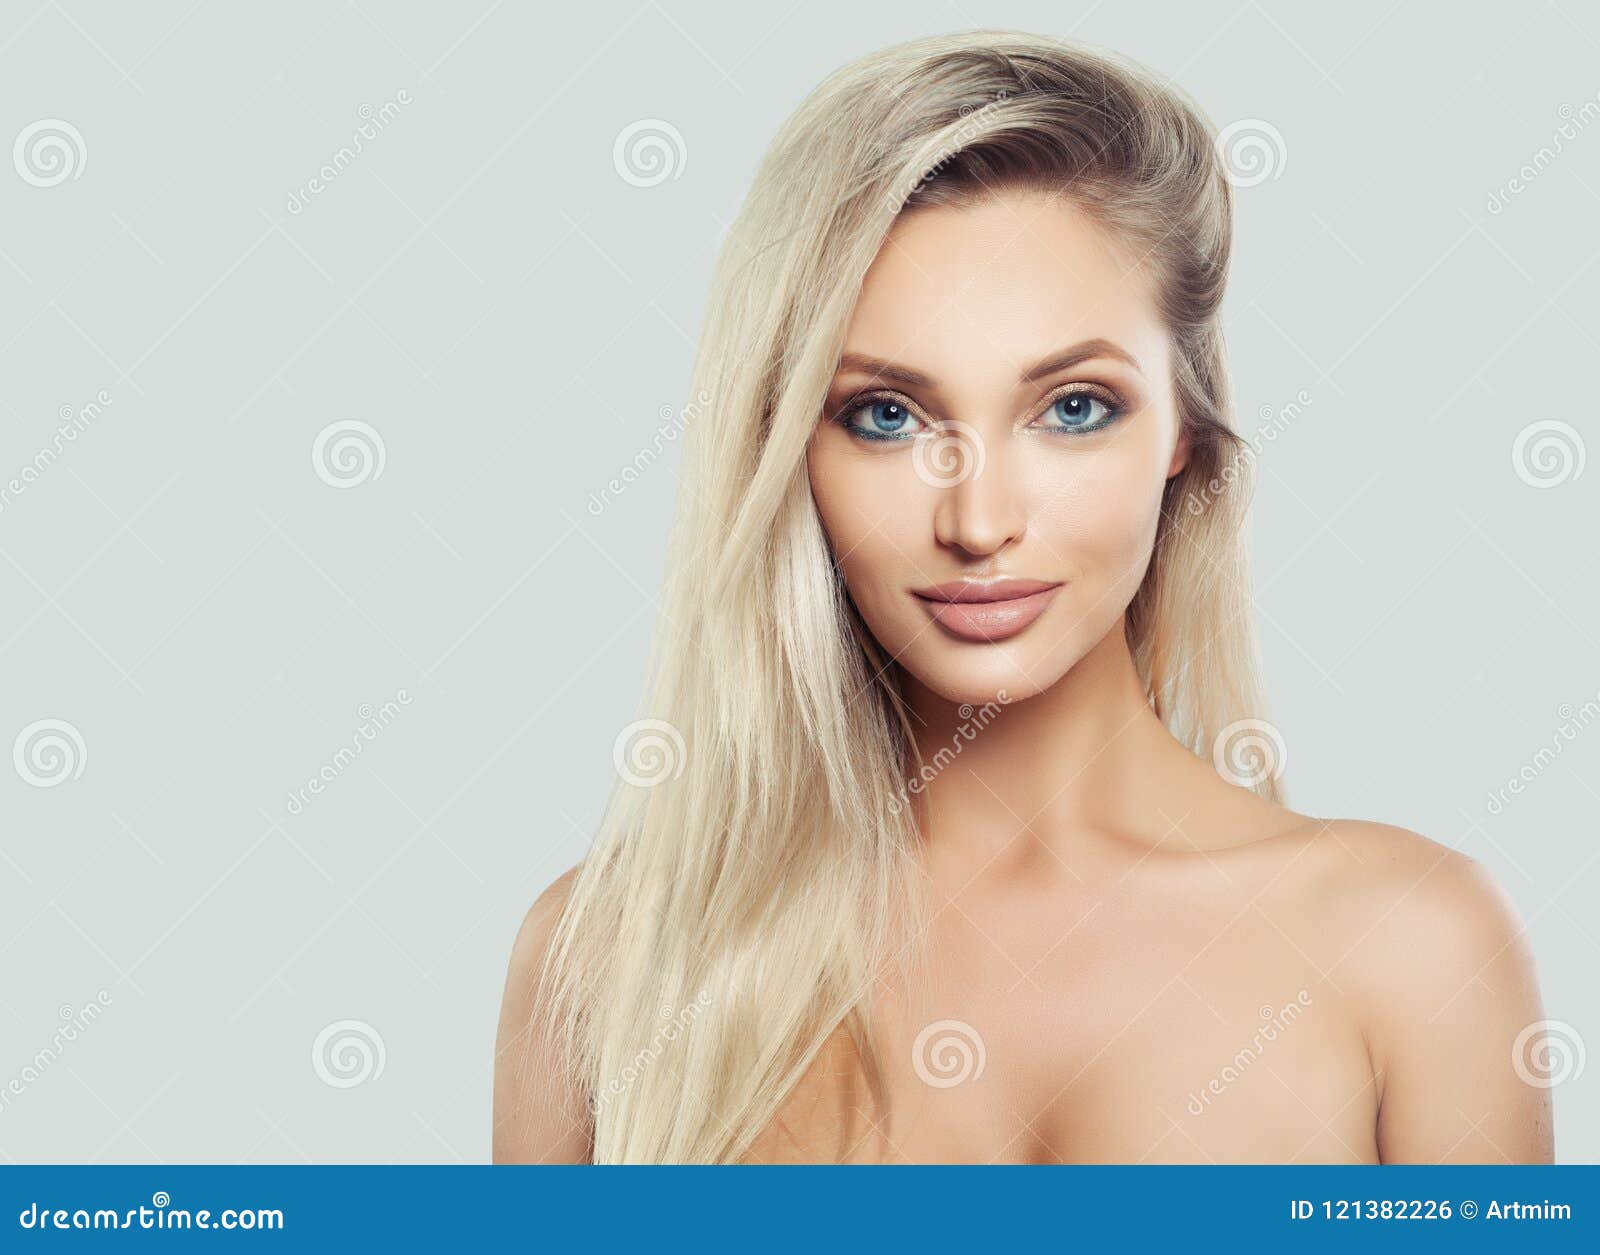 Natural Beauty Young Woman With Fresh Skin Stock Photo Image Of